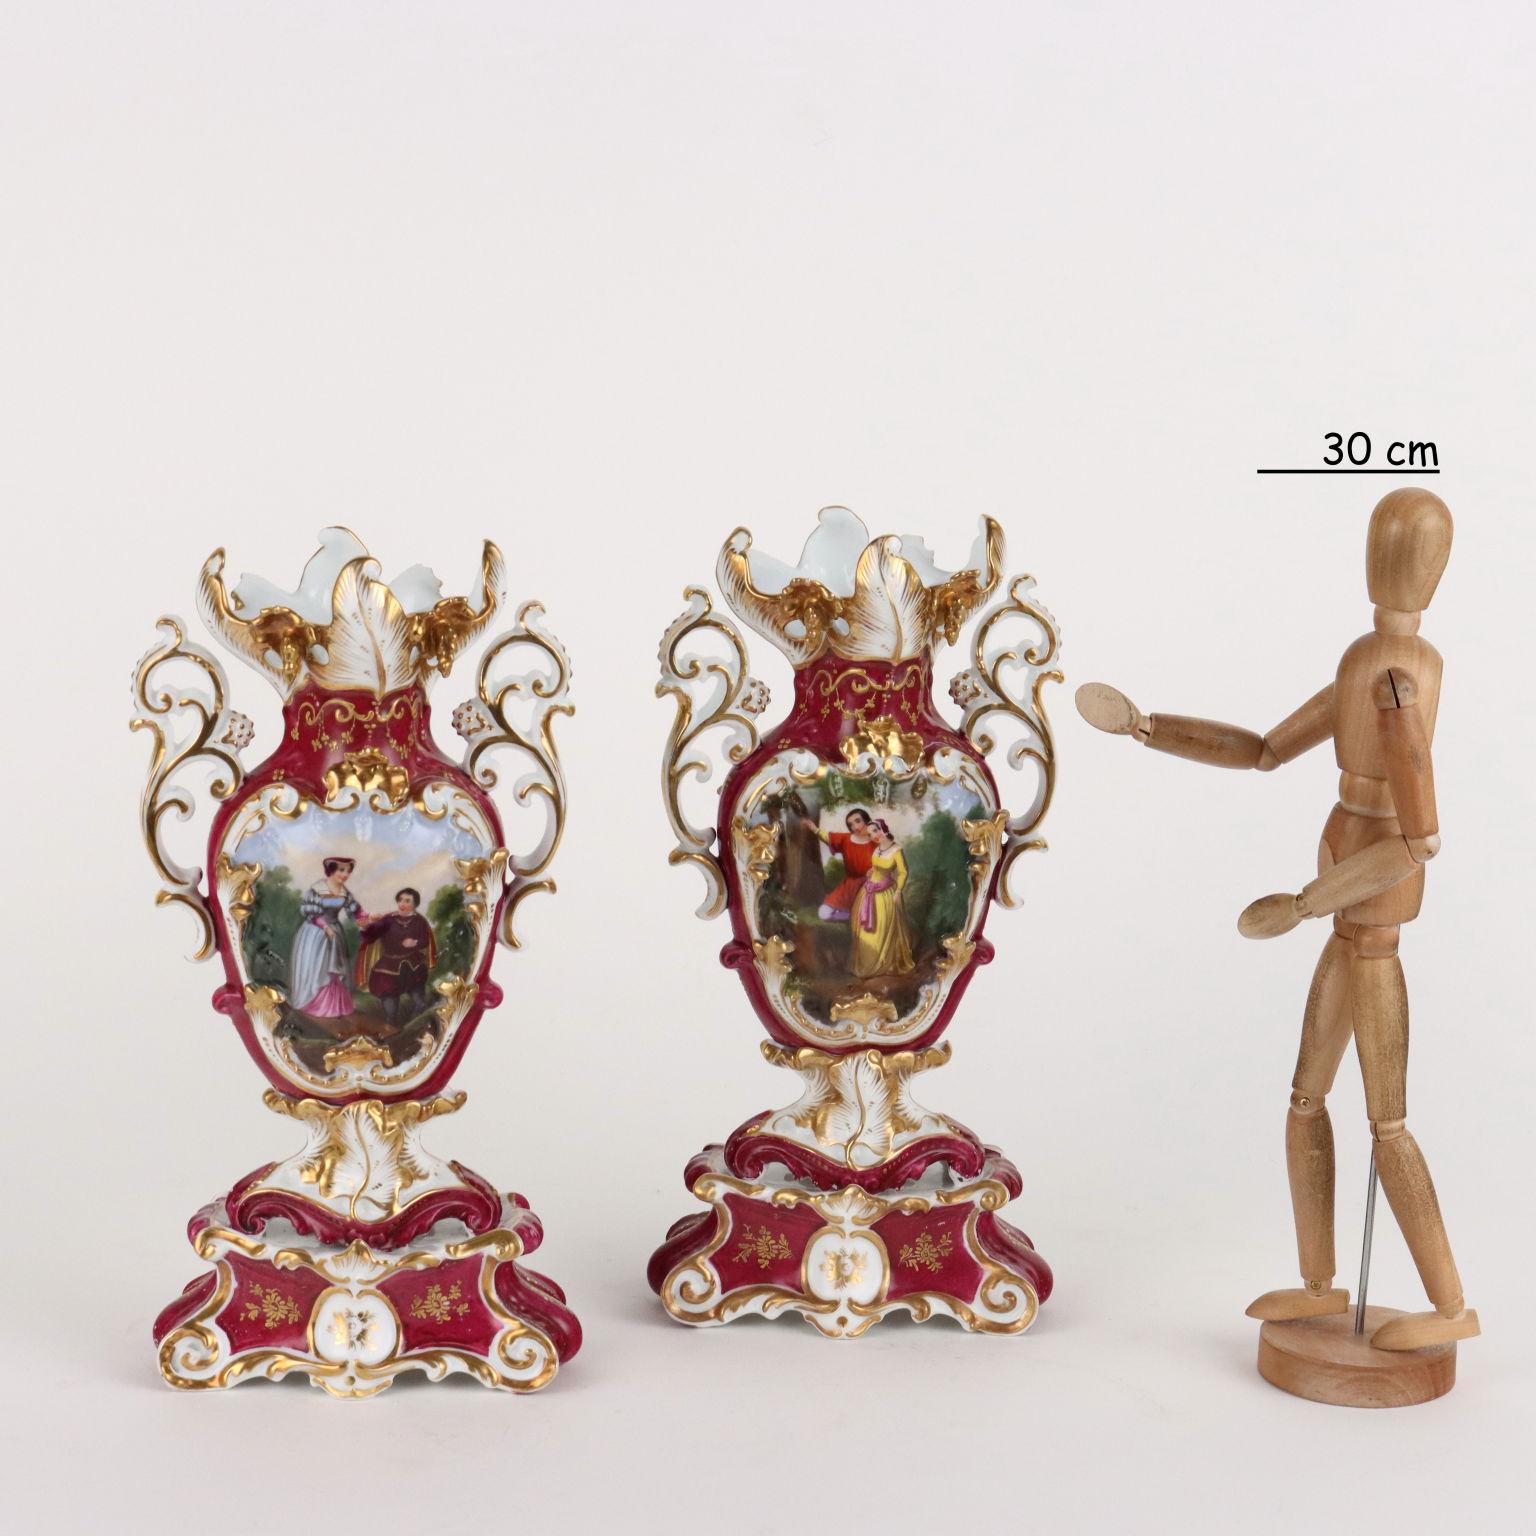 Pair of porcelain vases in the manner of Jacob Petit decorated with scenes of everyday life and bouquets of flowers in the reserves. Rich highlights in pure gold.